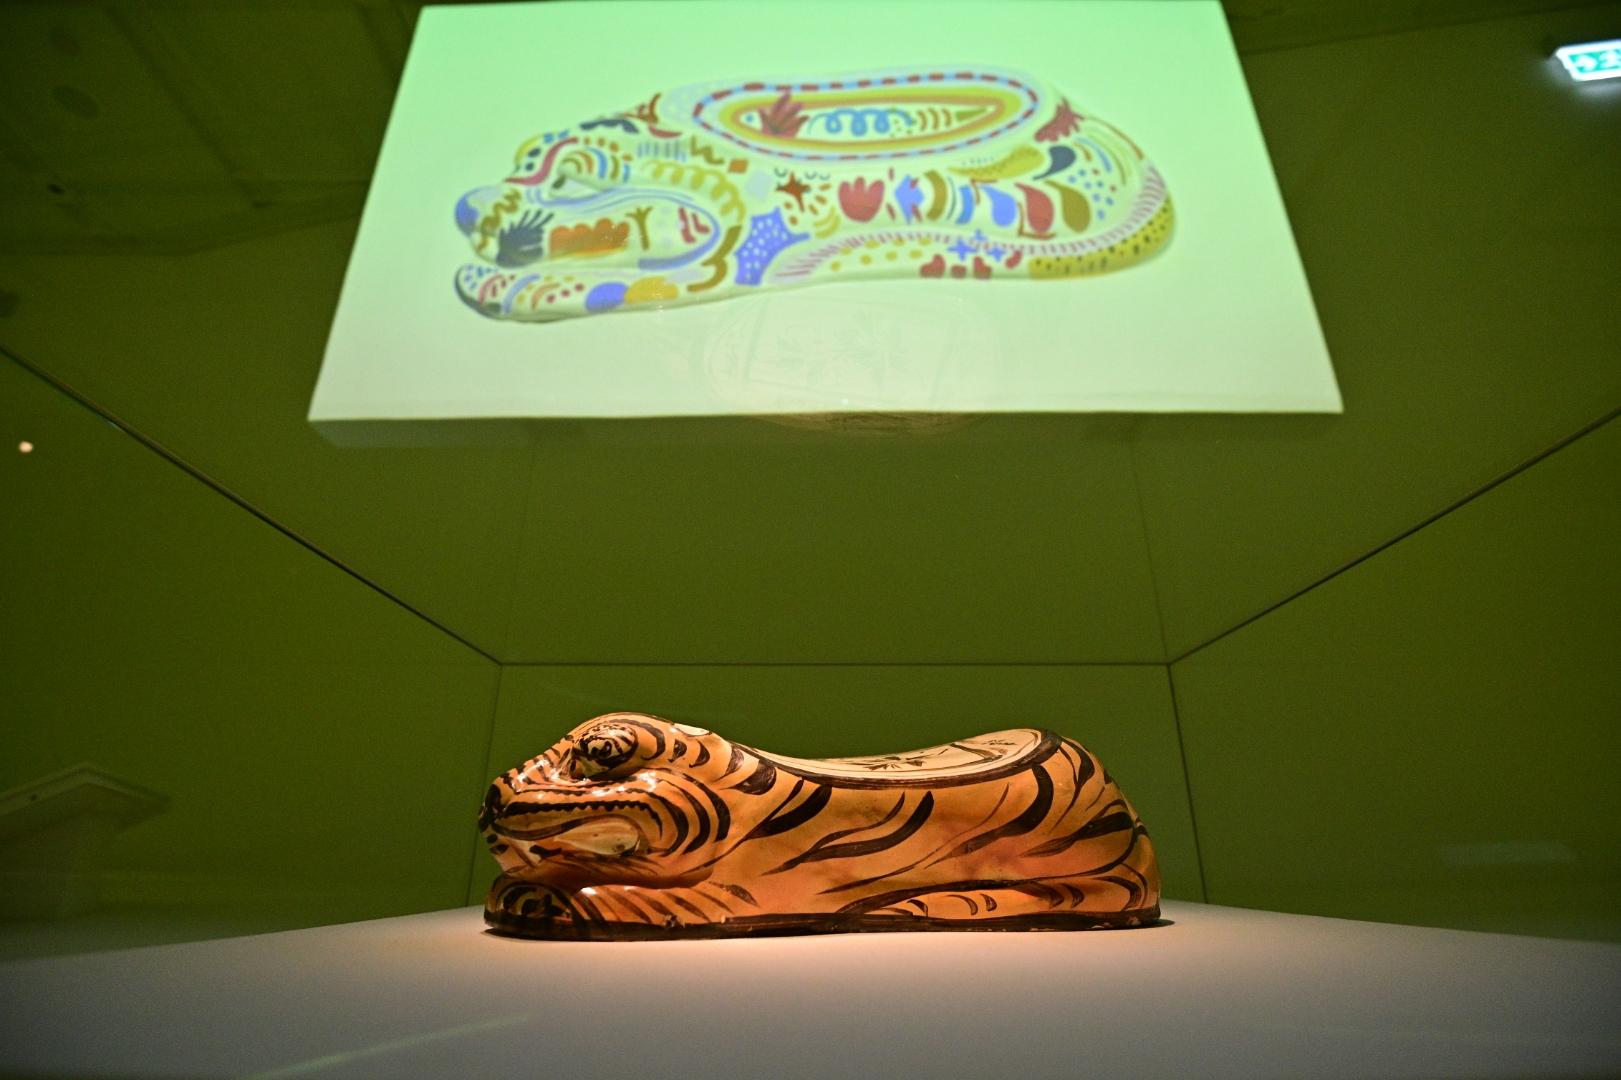 A wide array of new exhibitions are being held in the Hong Kong Museum of Art (HKMoA) to enable visitors to explore more stories that might have been out of the spotlight under the museum's four core collections. The exhibition "In-Between" is being held at the Wing on the ground floor and first floor of the HKMoA. Picture shows a tiger-shaped pillow painted in black and yellow on white ground, of the Cizhou type of Shanxi, from the Jin dynasty (donated by Mr Lee Luen-fai).